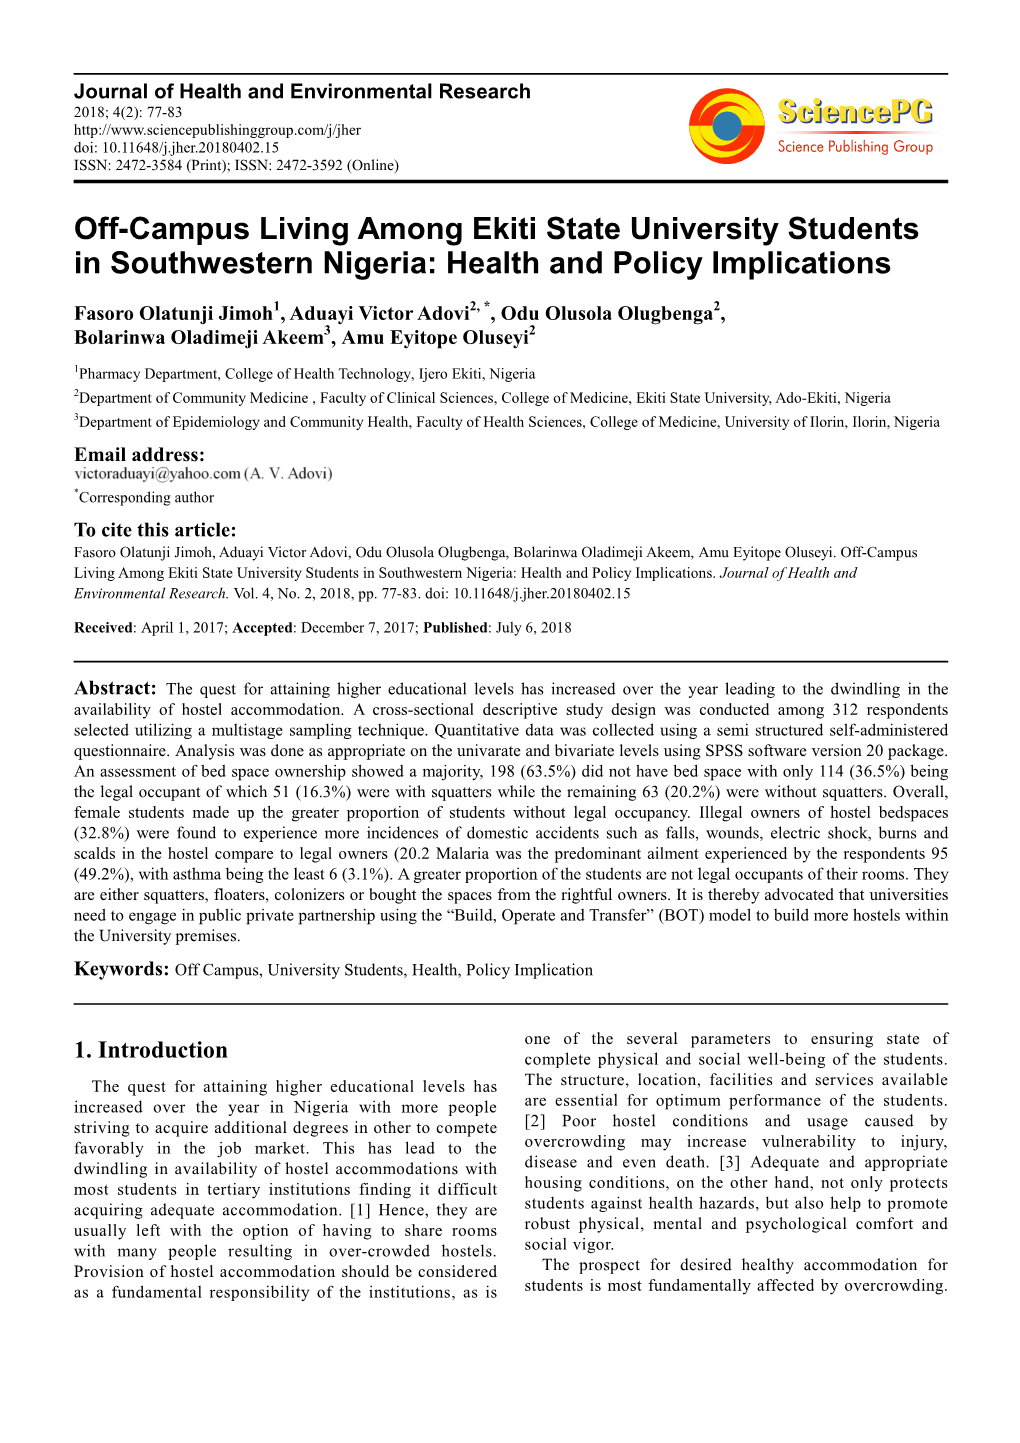 Off-Campus Living Among Ekiti State University Students in Southwestern Nigeria: Health and Policy Implications